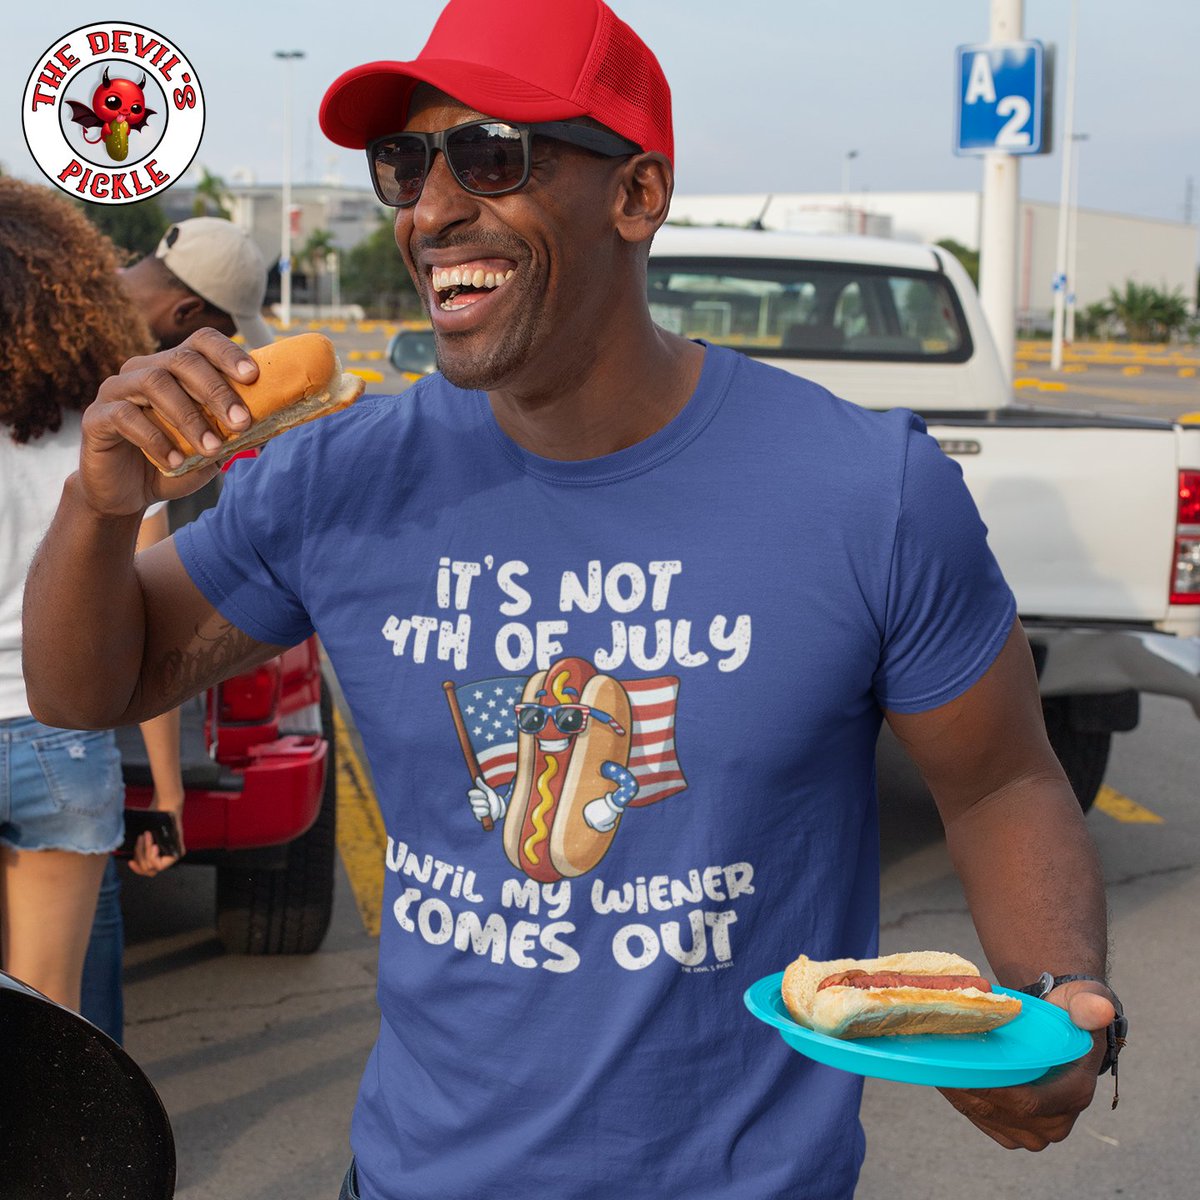 Bringing out my wiener for some holiday fun... and I'm not talking about the hot dog. 😉4th of July Shirts at The Devil's Pickle!

#IndependenceDay #americanpride #hellyeahamerica #offensivetshirts #ProudAmerican #adultinghumor #american #merica #adultmeme #patriot #adulthumor